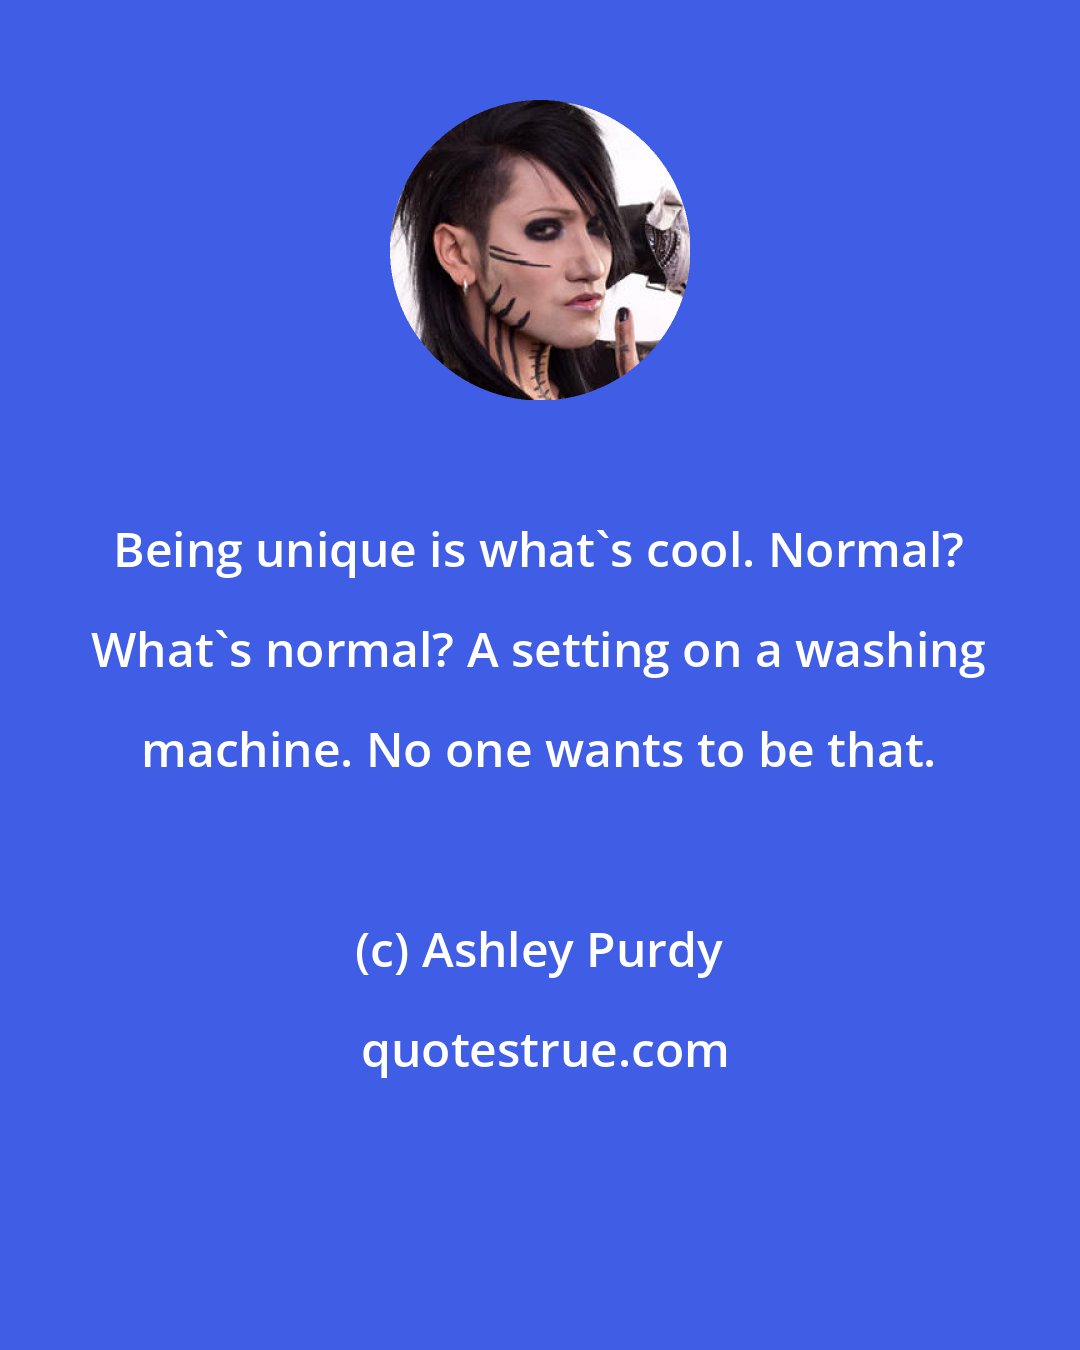 Ashley Purdy: Being unique is what's cool. Normal? What's normal? A setting on a washing machine. No one wants to be that.